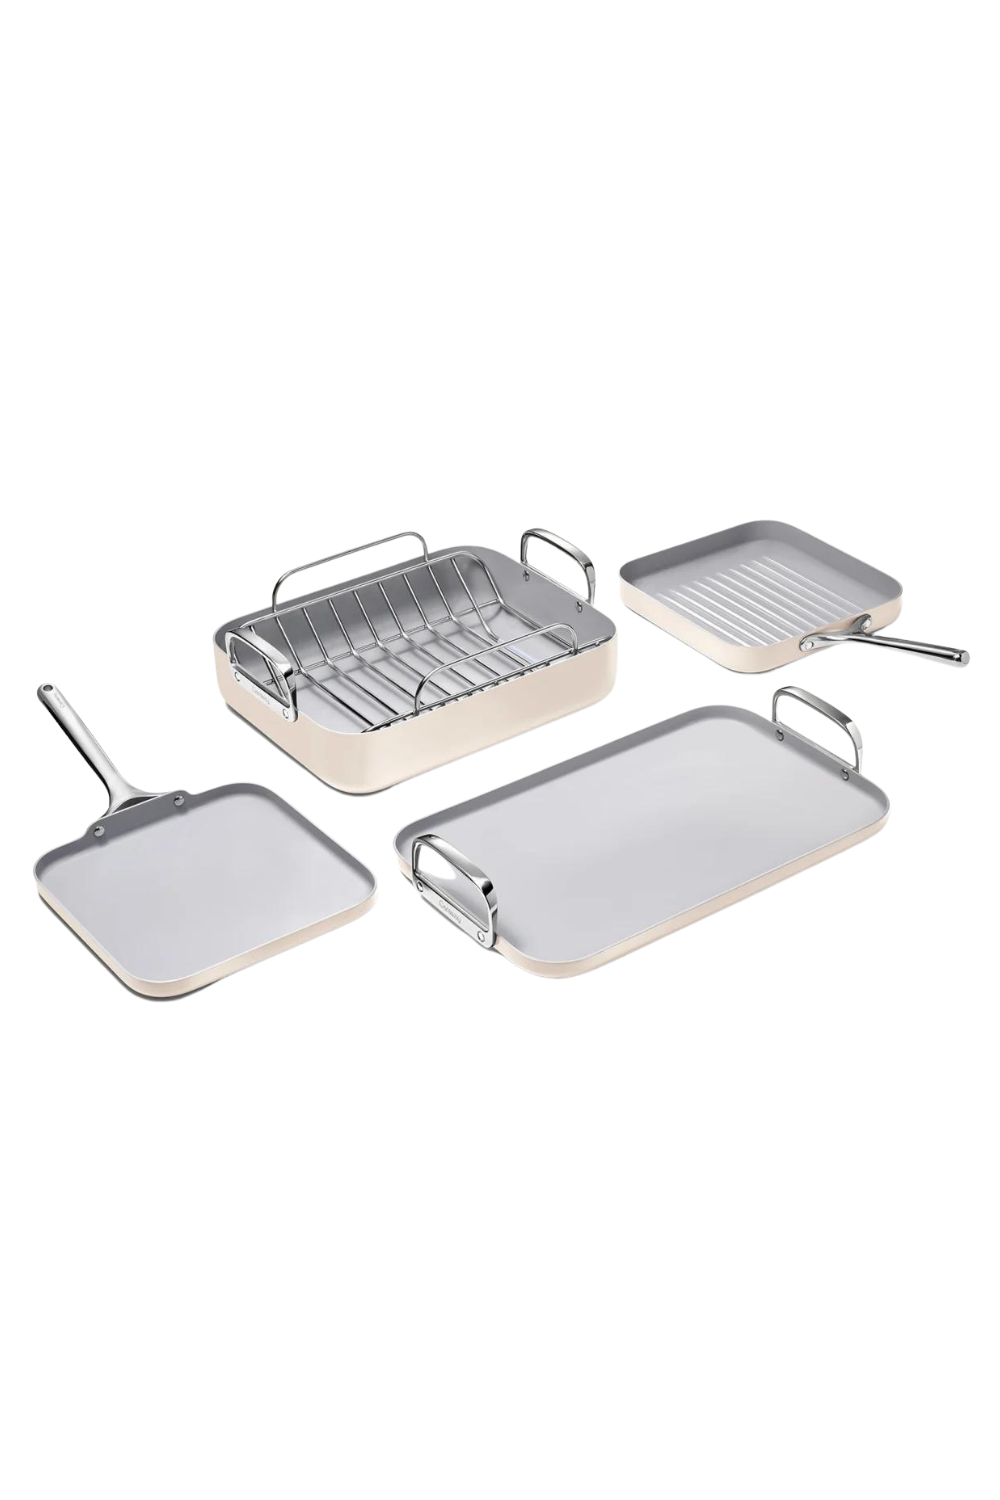 Caraway Home Square Cookware Set